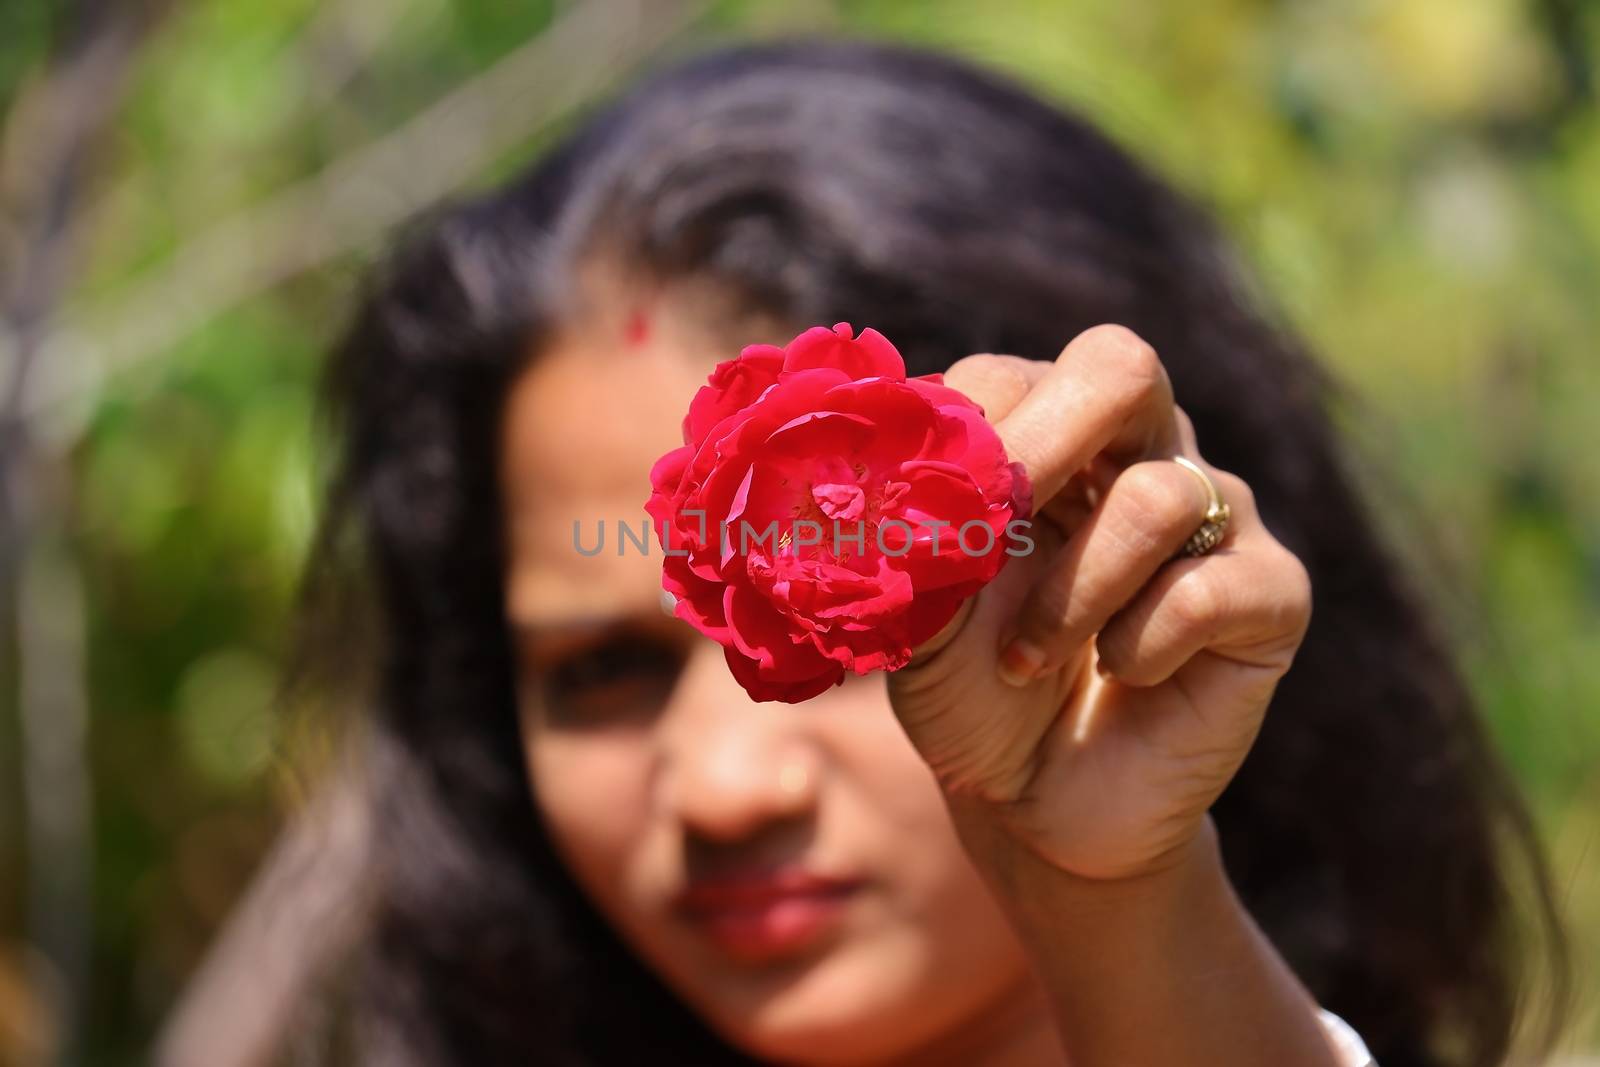 Red rose flower with blurred young girl face by 9500102400